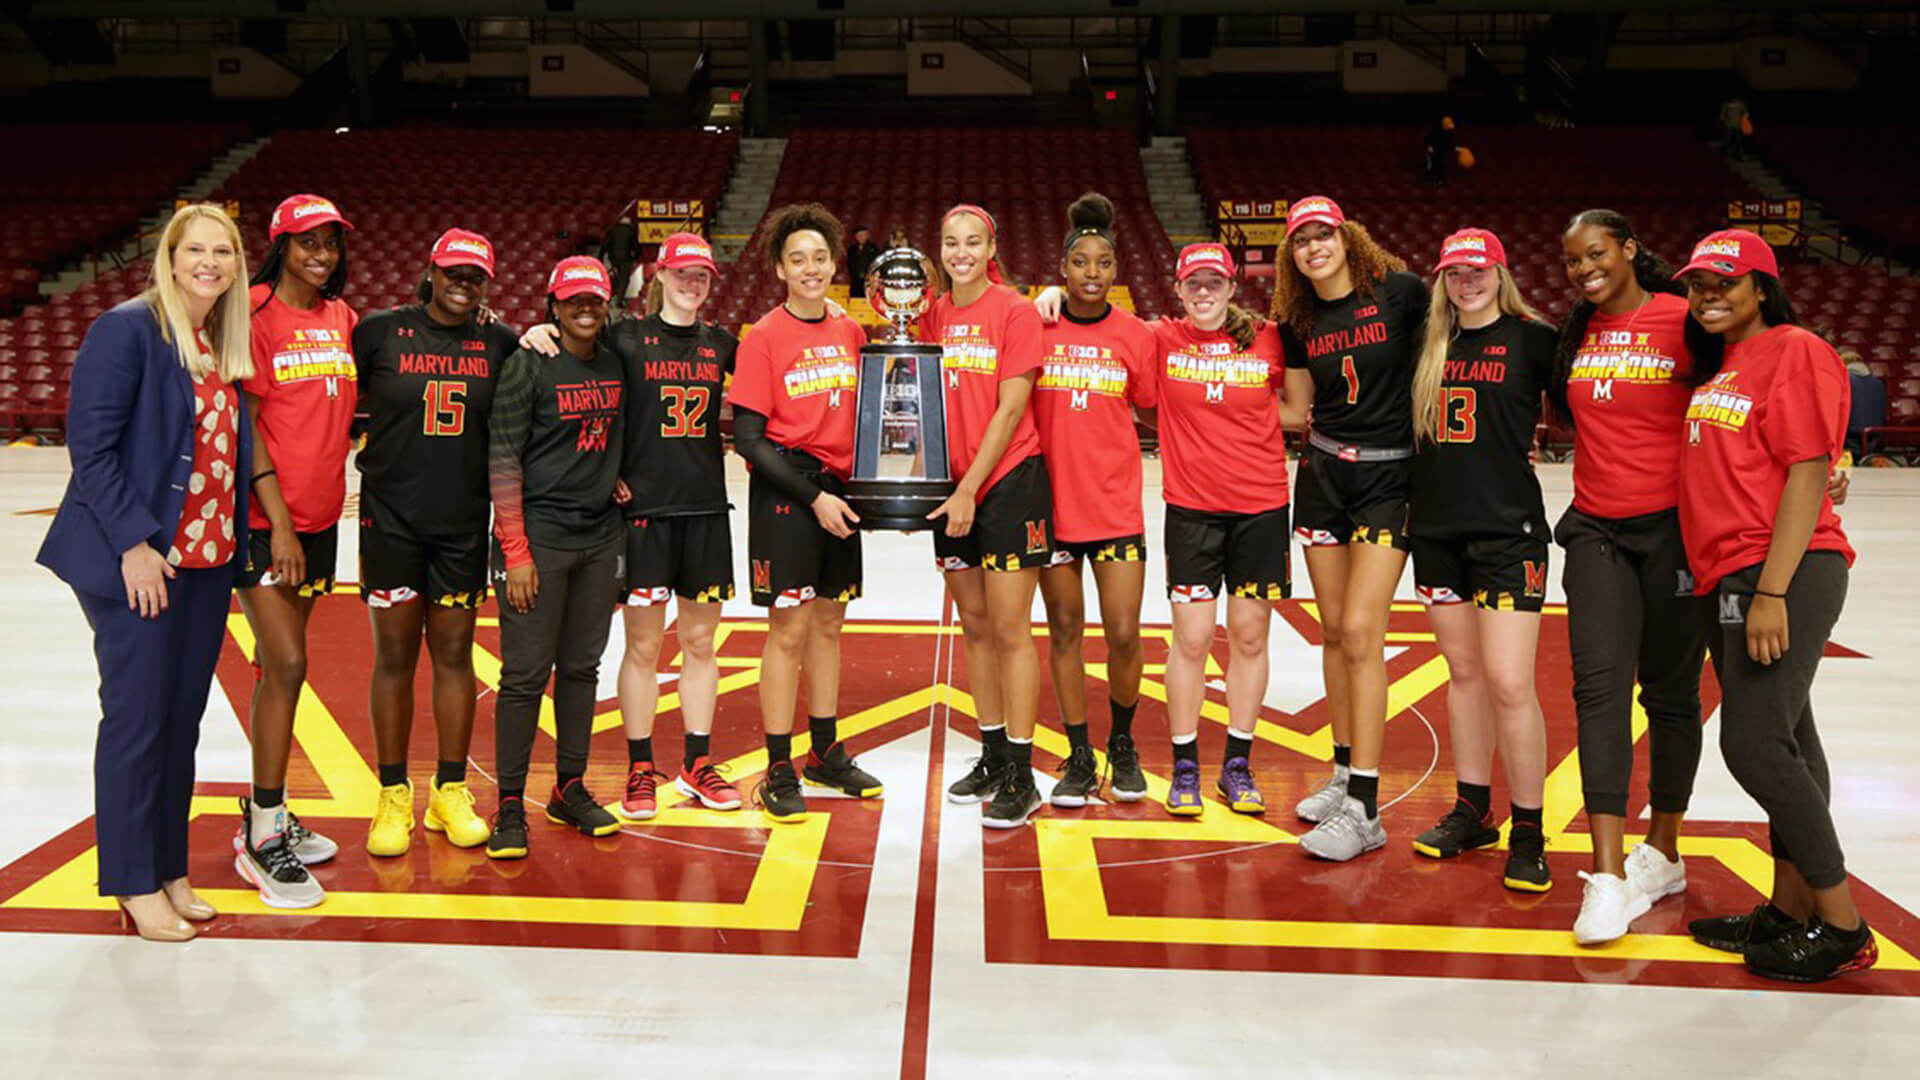 Women's basketball team poses with Big Ten trophy